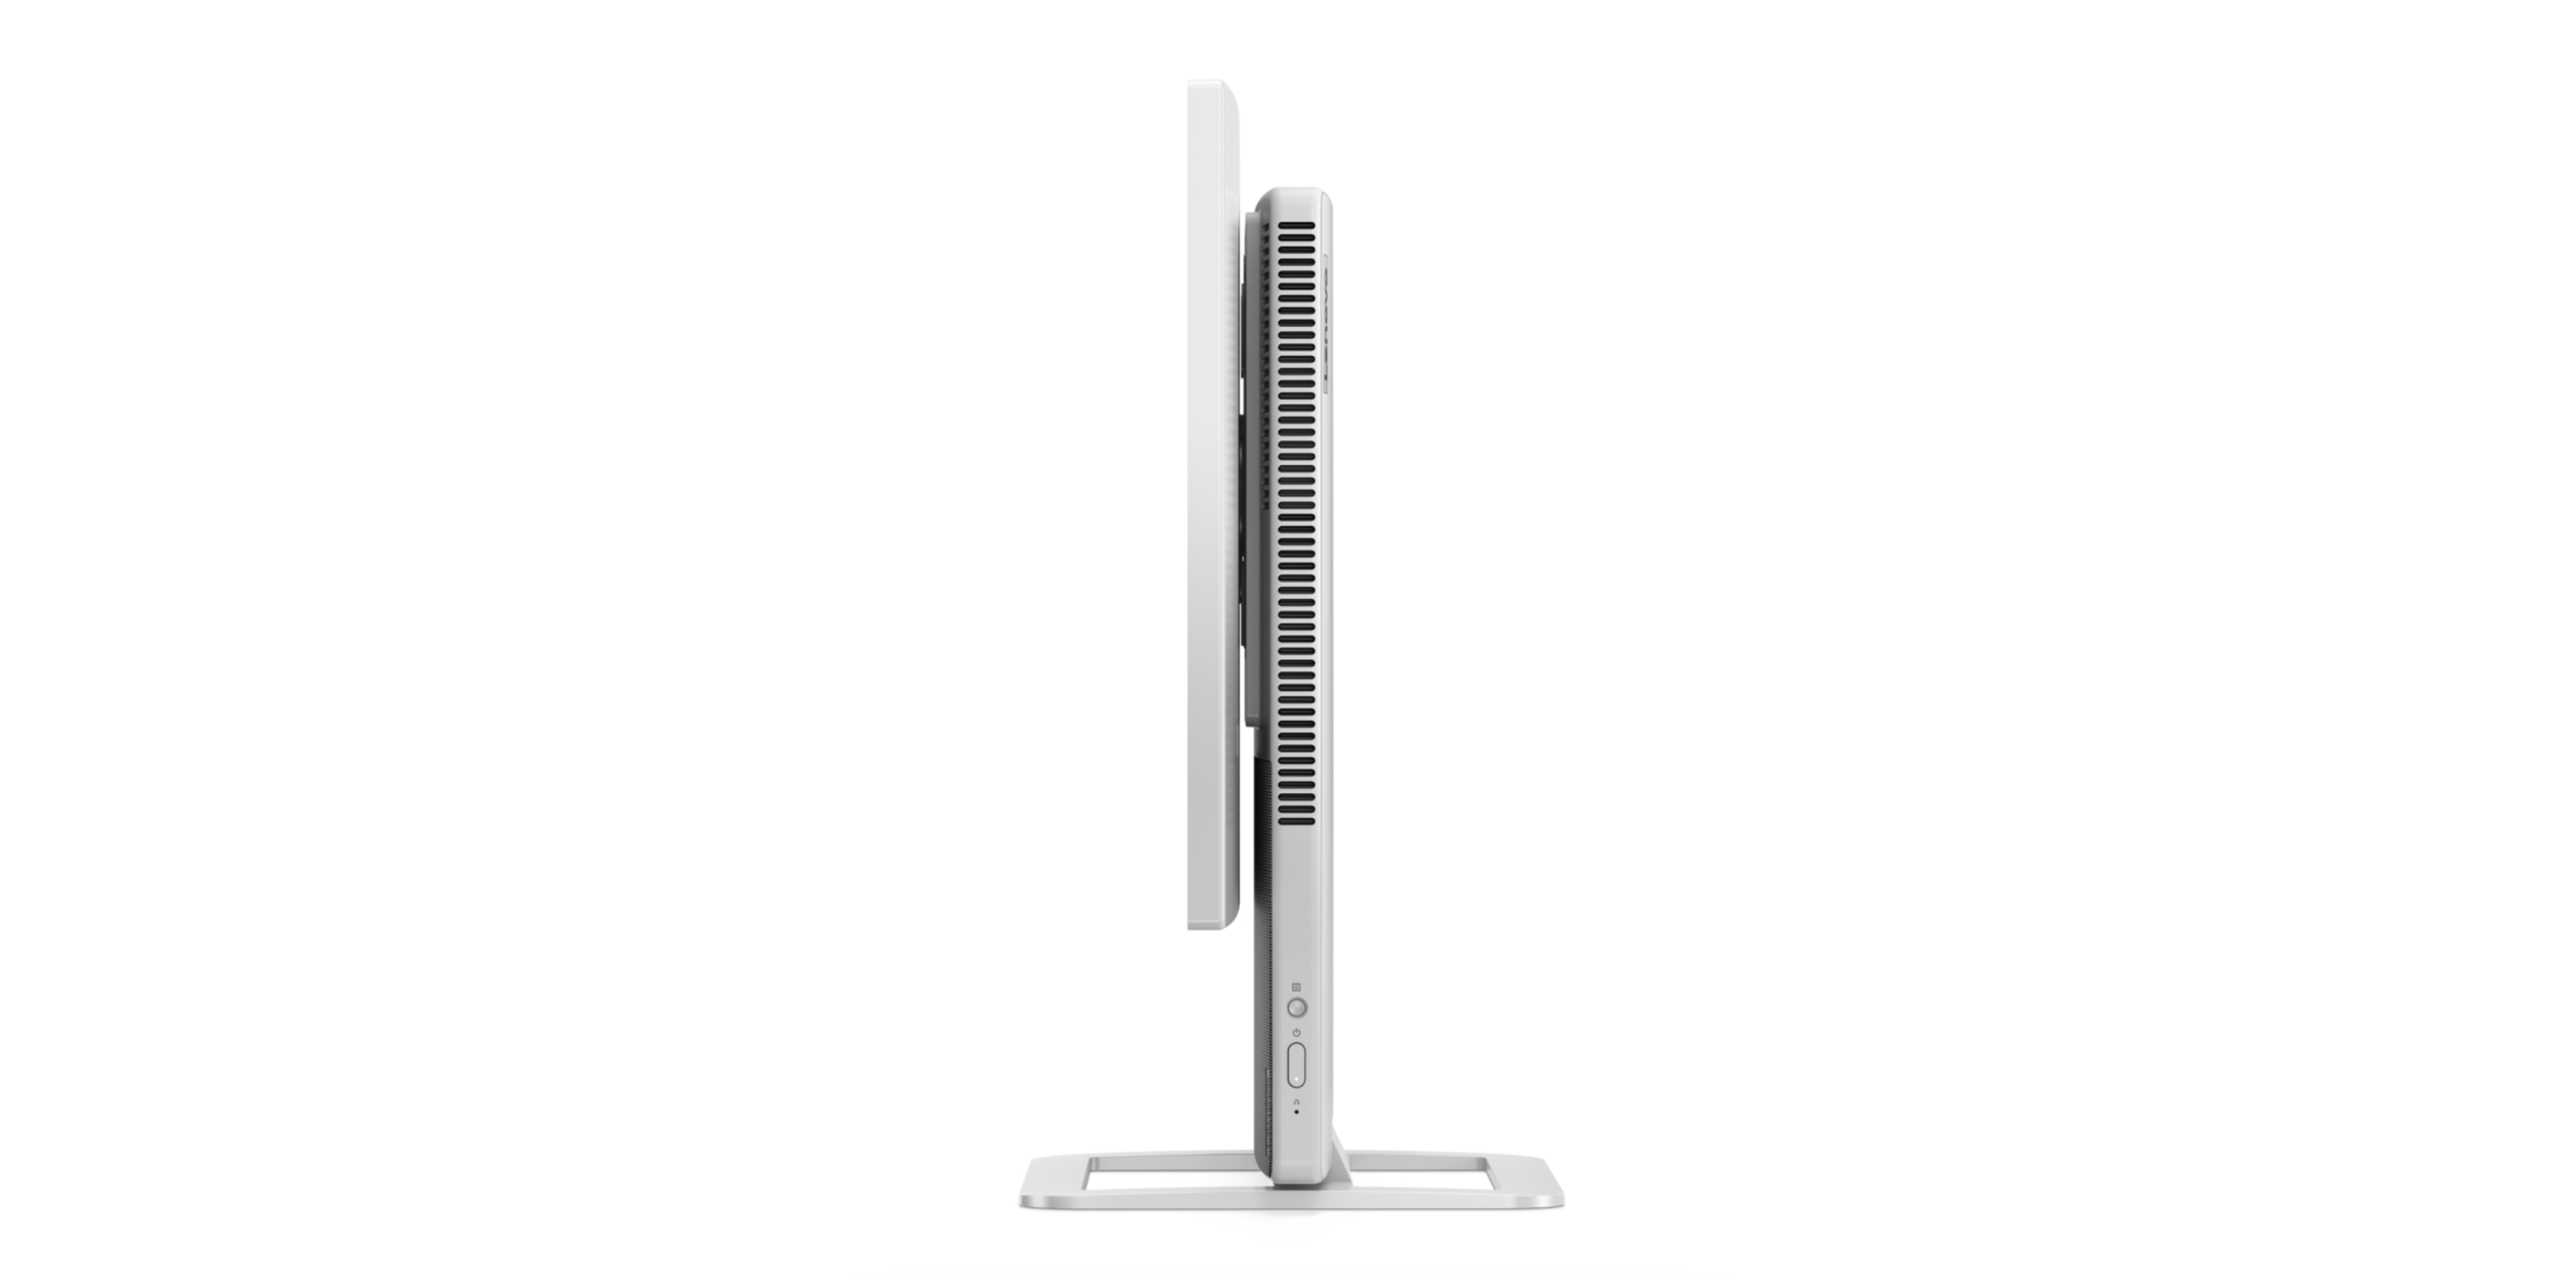 Cổng kết nối PC all-in-one Yoga AIO 7